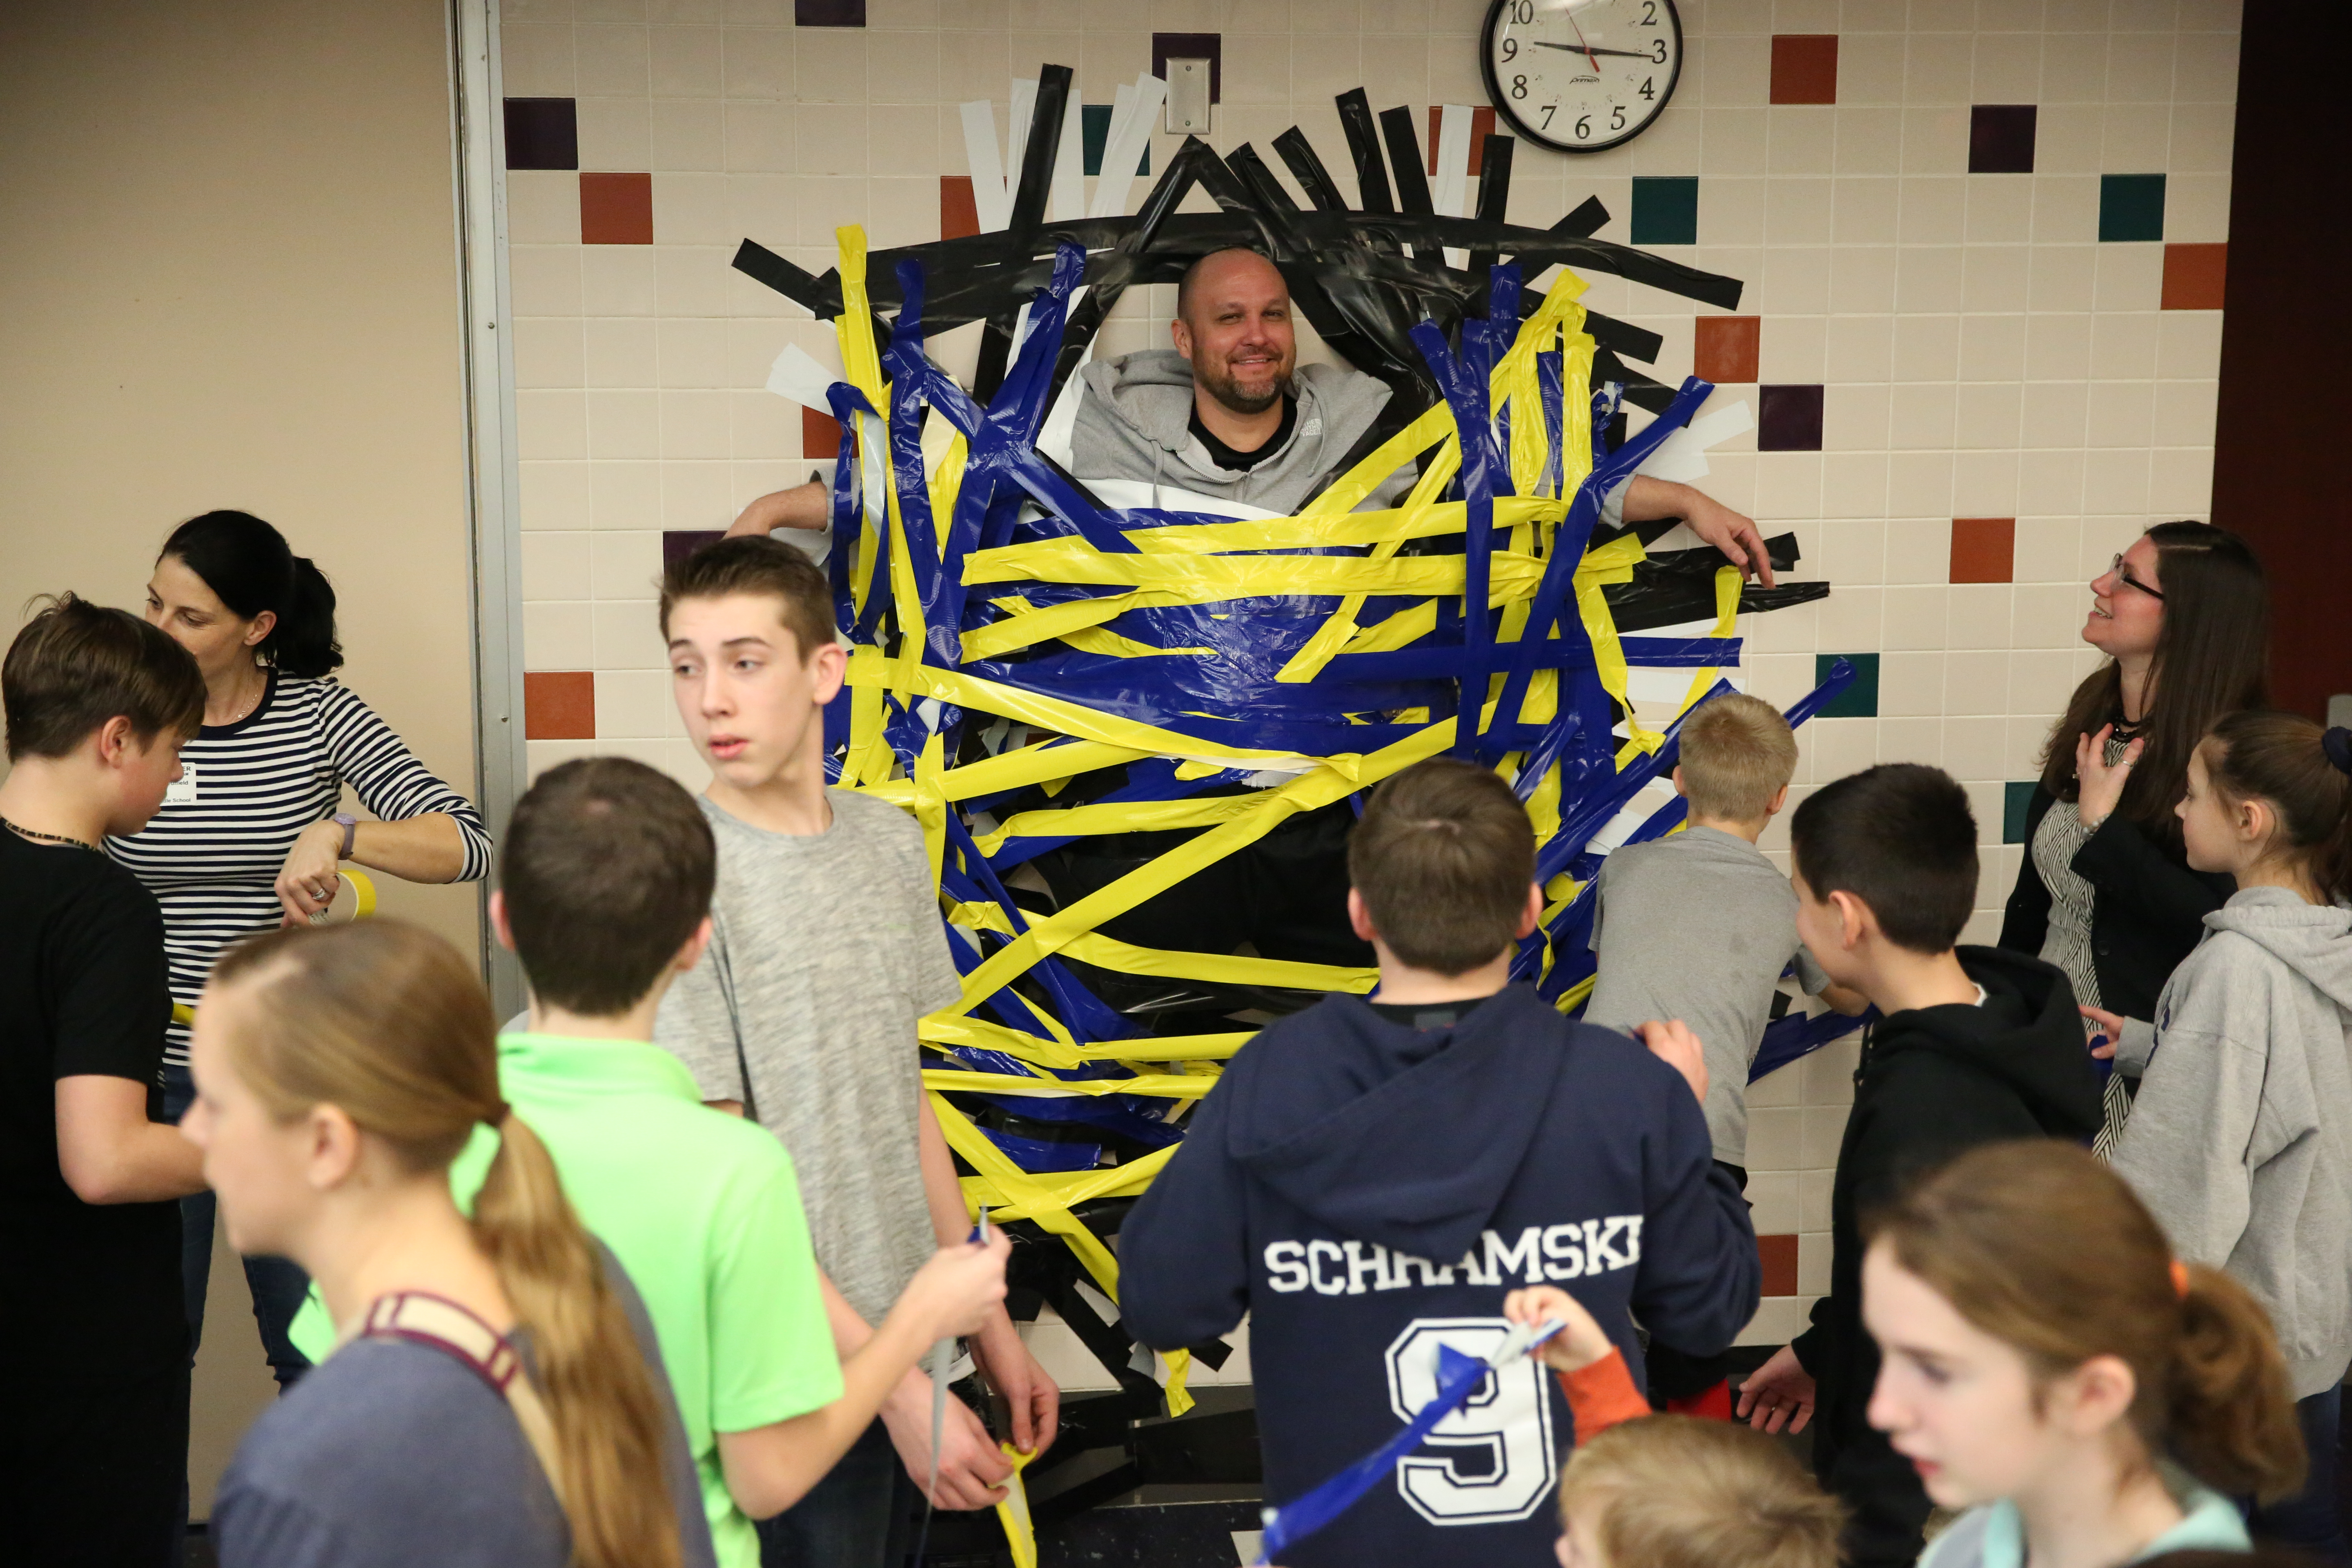 Mr. Fry gets duct taped